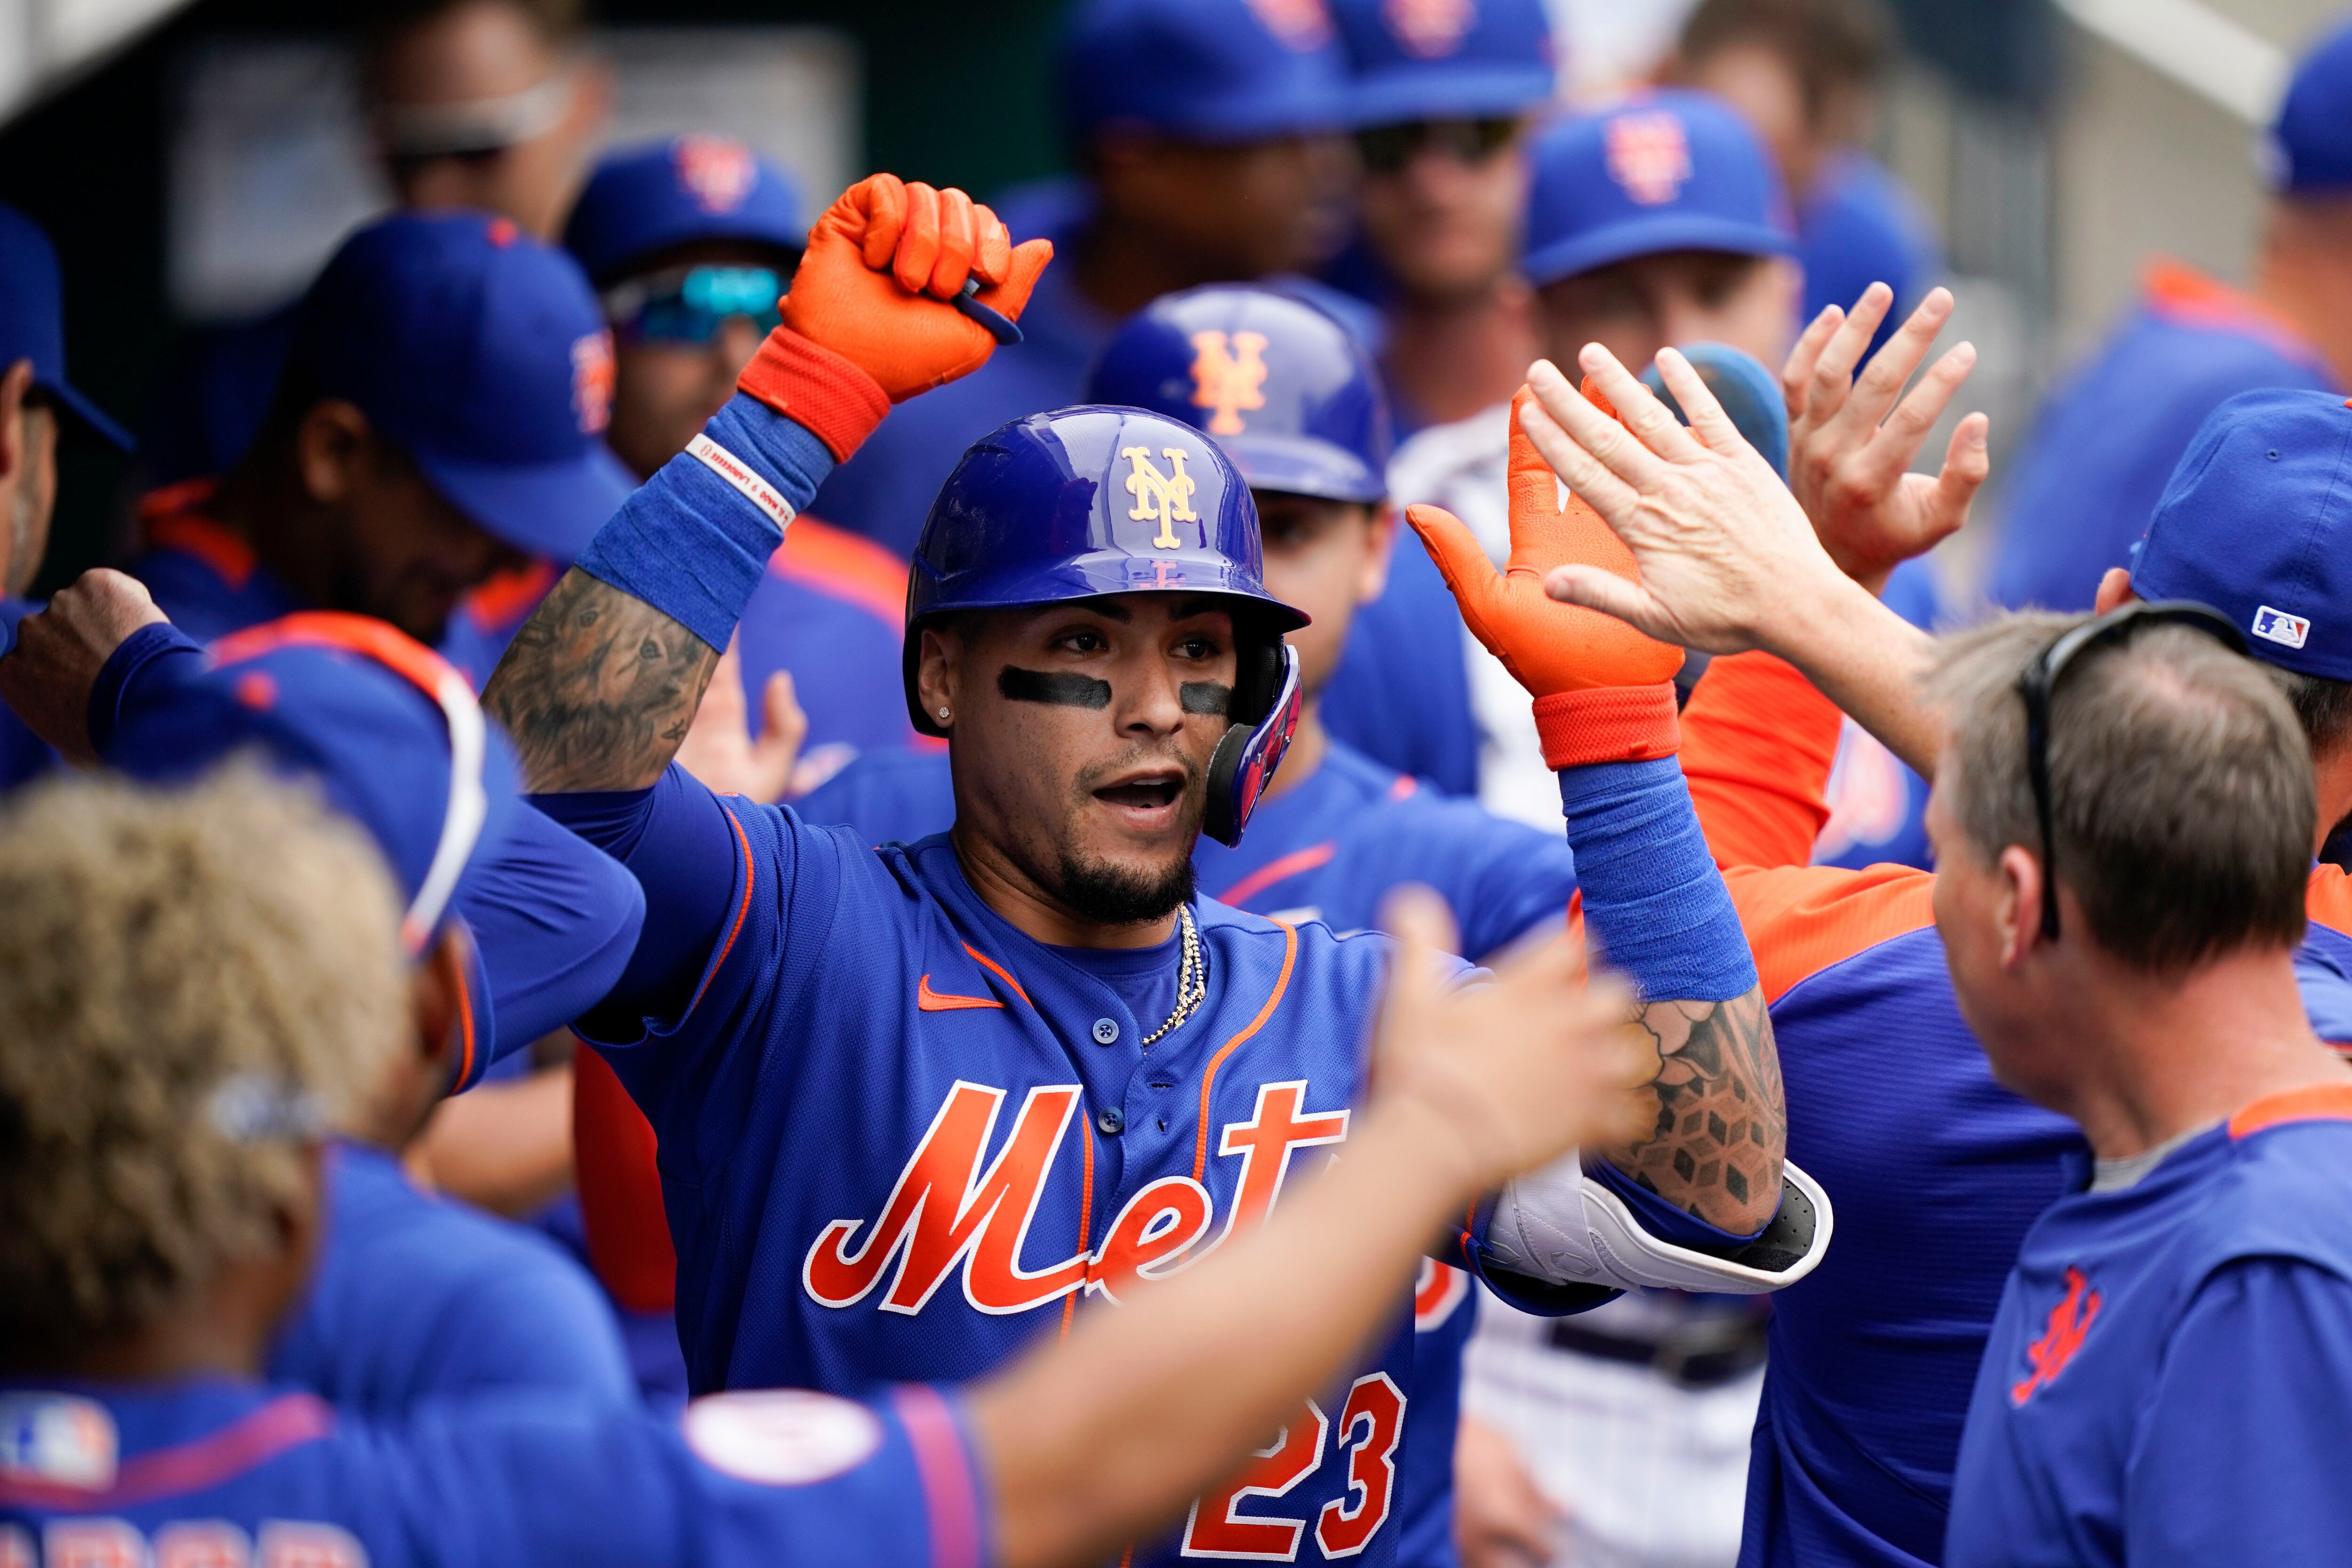 Mets Players Like Javier Baez Are Giving Fans Thumbs Down Over Boos